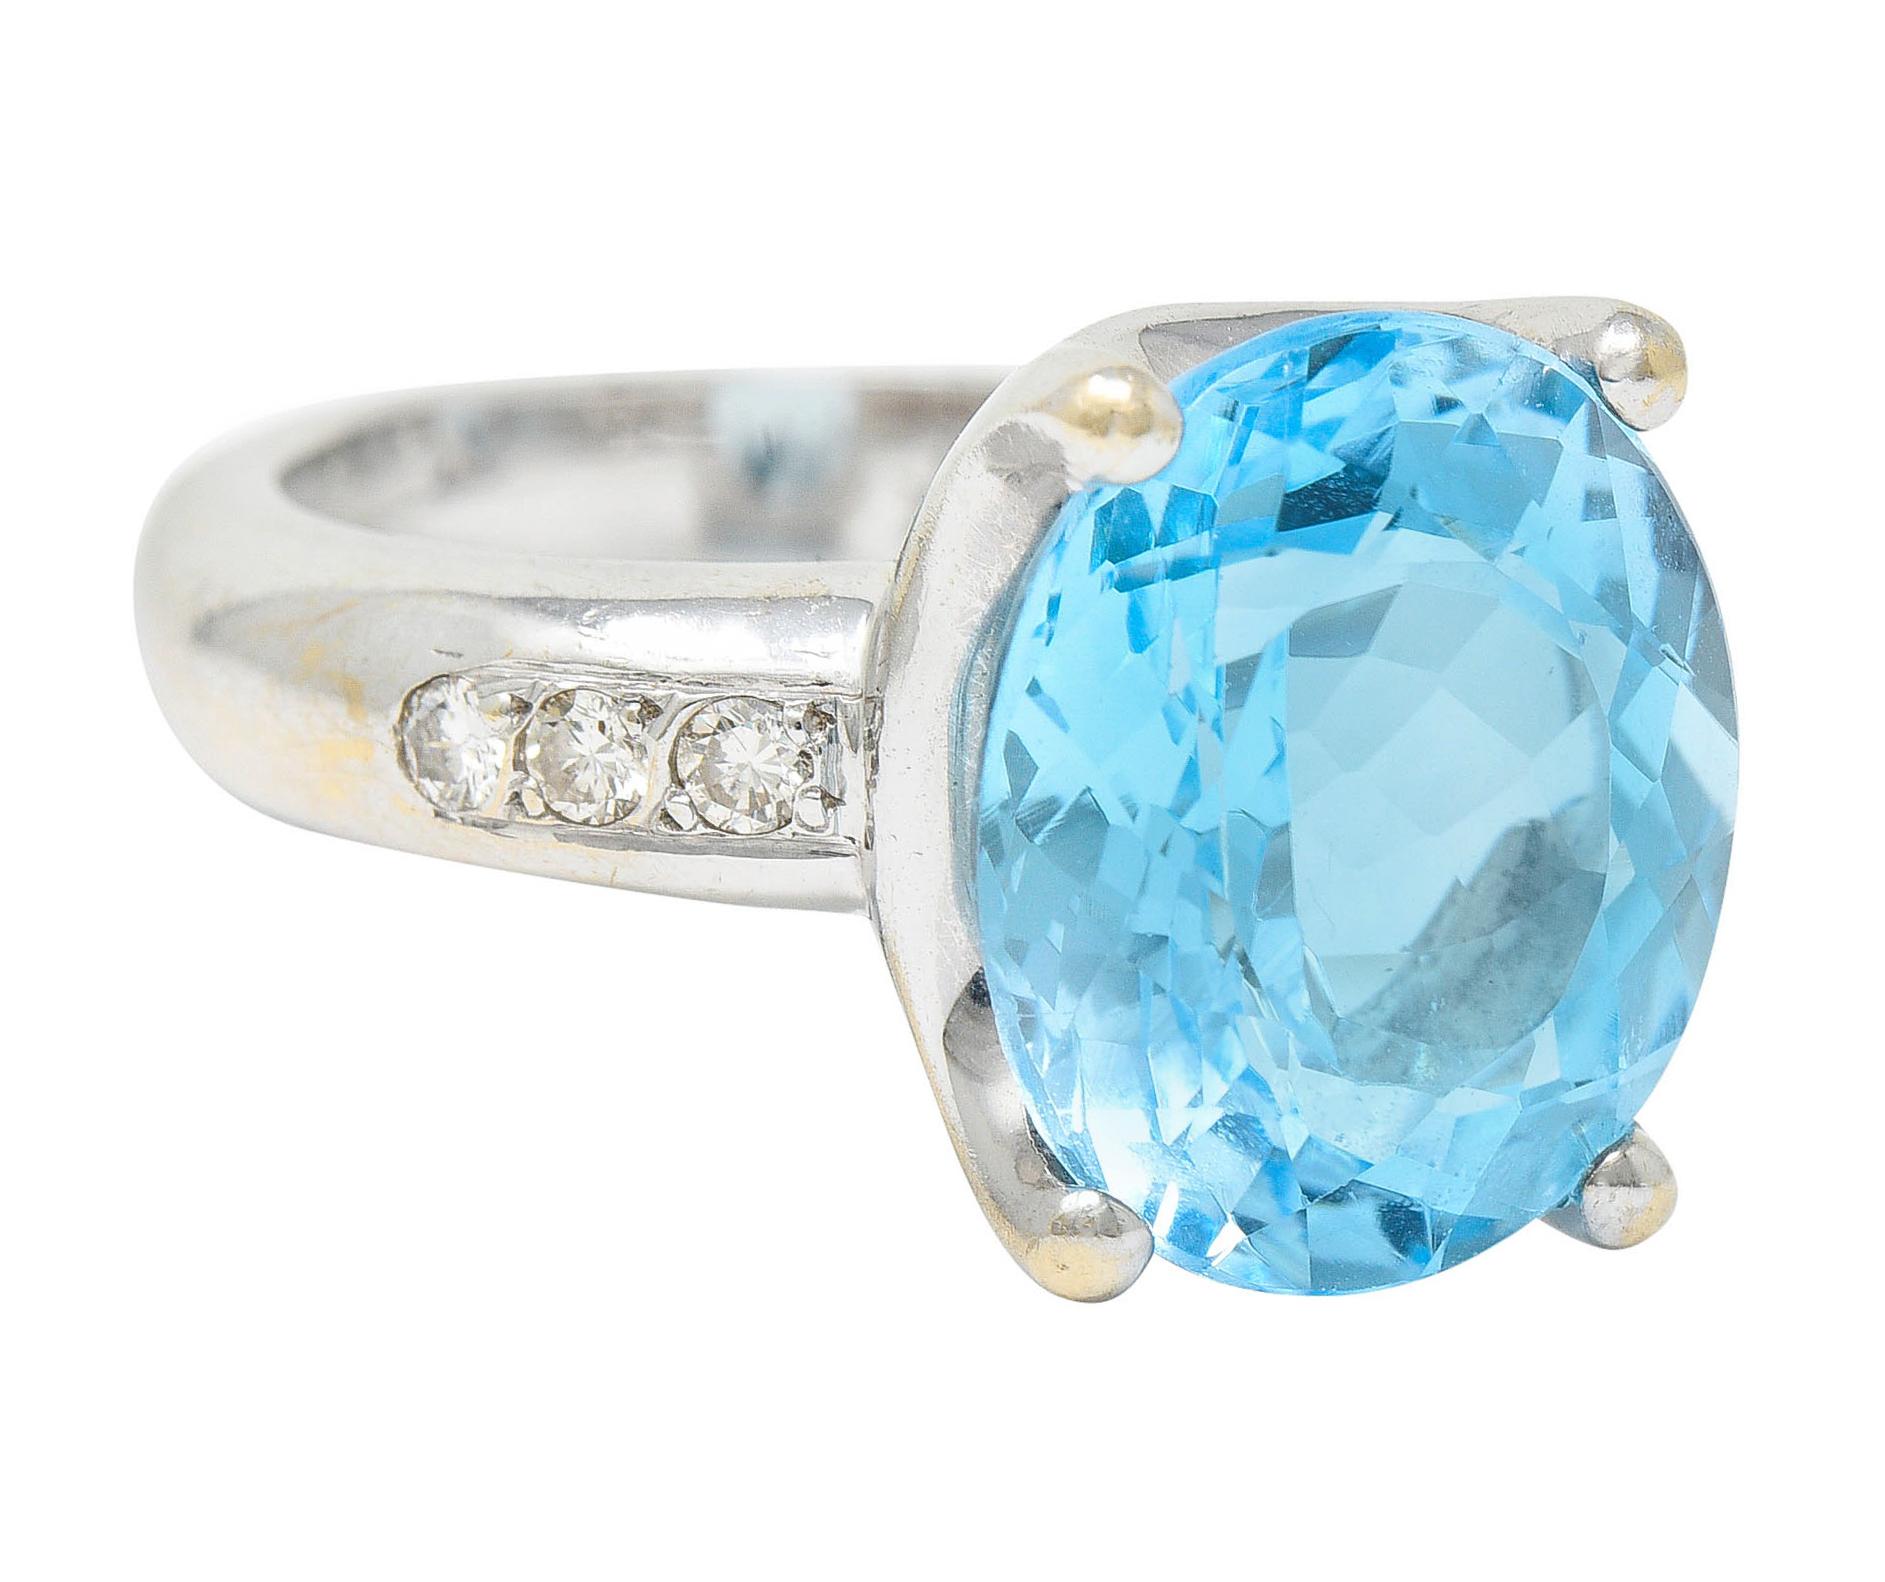 Centering an oval mixed cut blue topaz measuring approximately 14.0 x 12.0 mm

Transparent with uniform medium light sky blue color

Set in a stylized basket and with a puffed band shank

Accented by round brilliant cut diamonds weighing in total